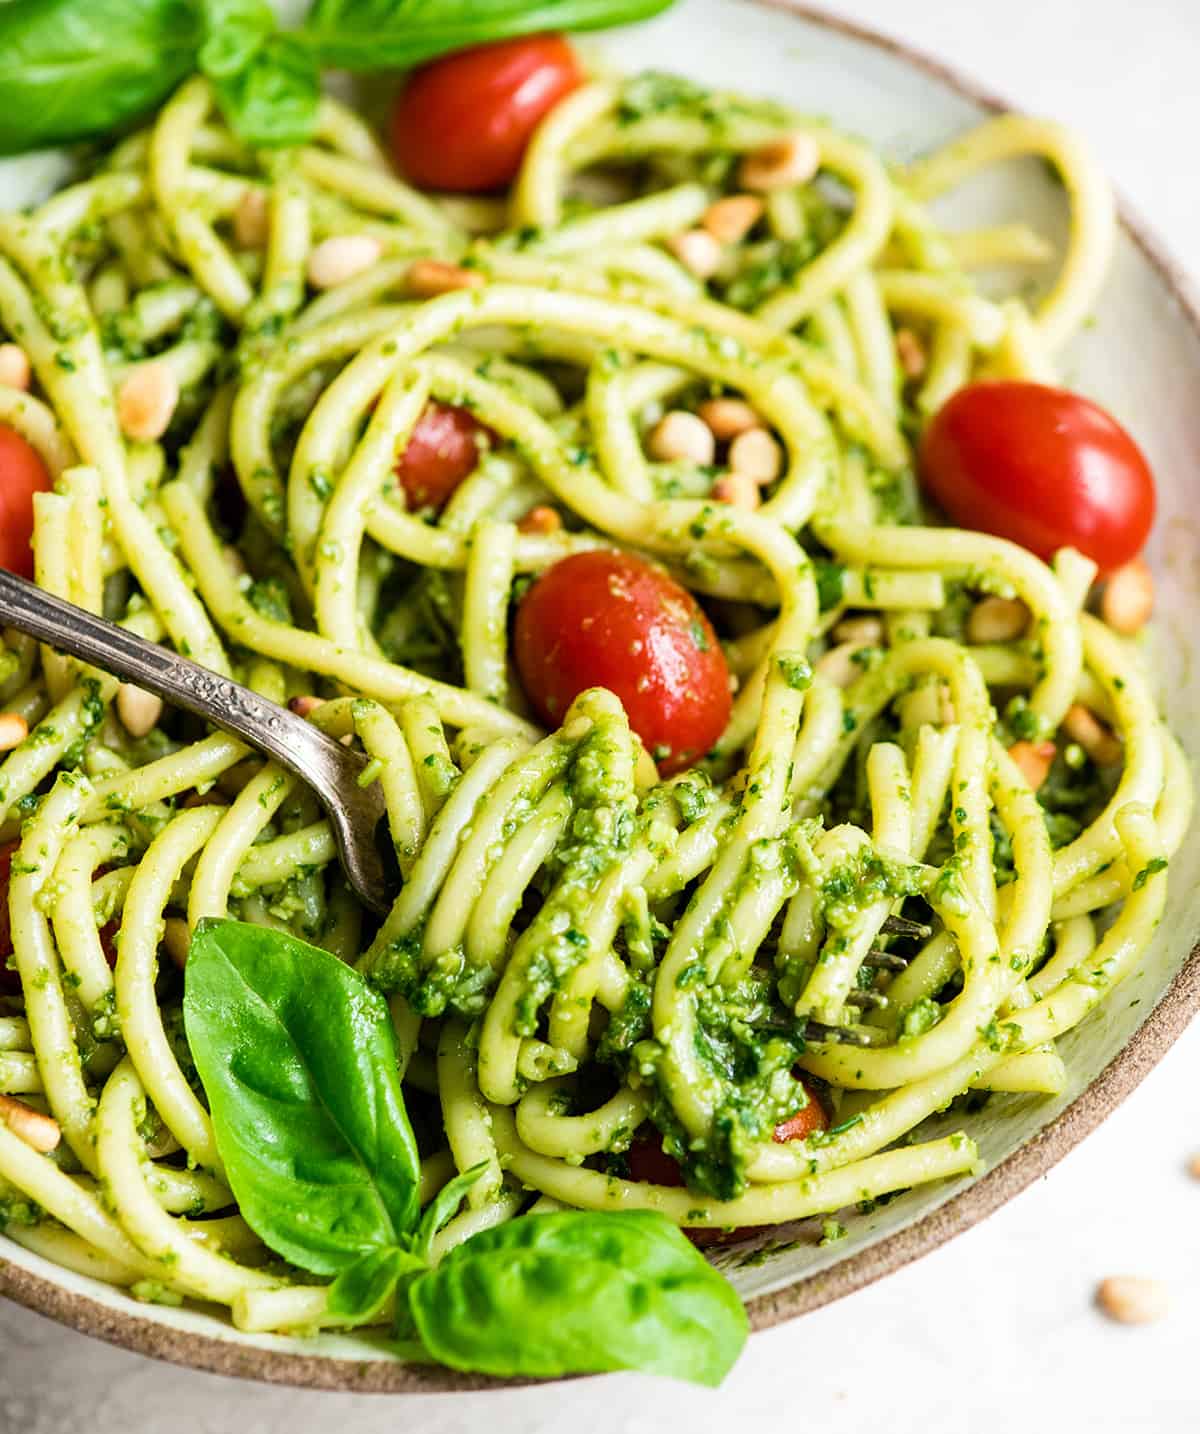 up close front view of a bowl of pasta with Basil Pesto Sauce on it garnished with fresh basil leaves, toasted pine nuts, and red cherry tomatoes. There is a fork with pasta twirled on it. 